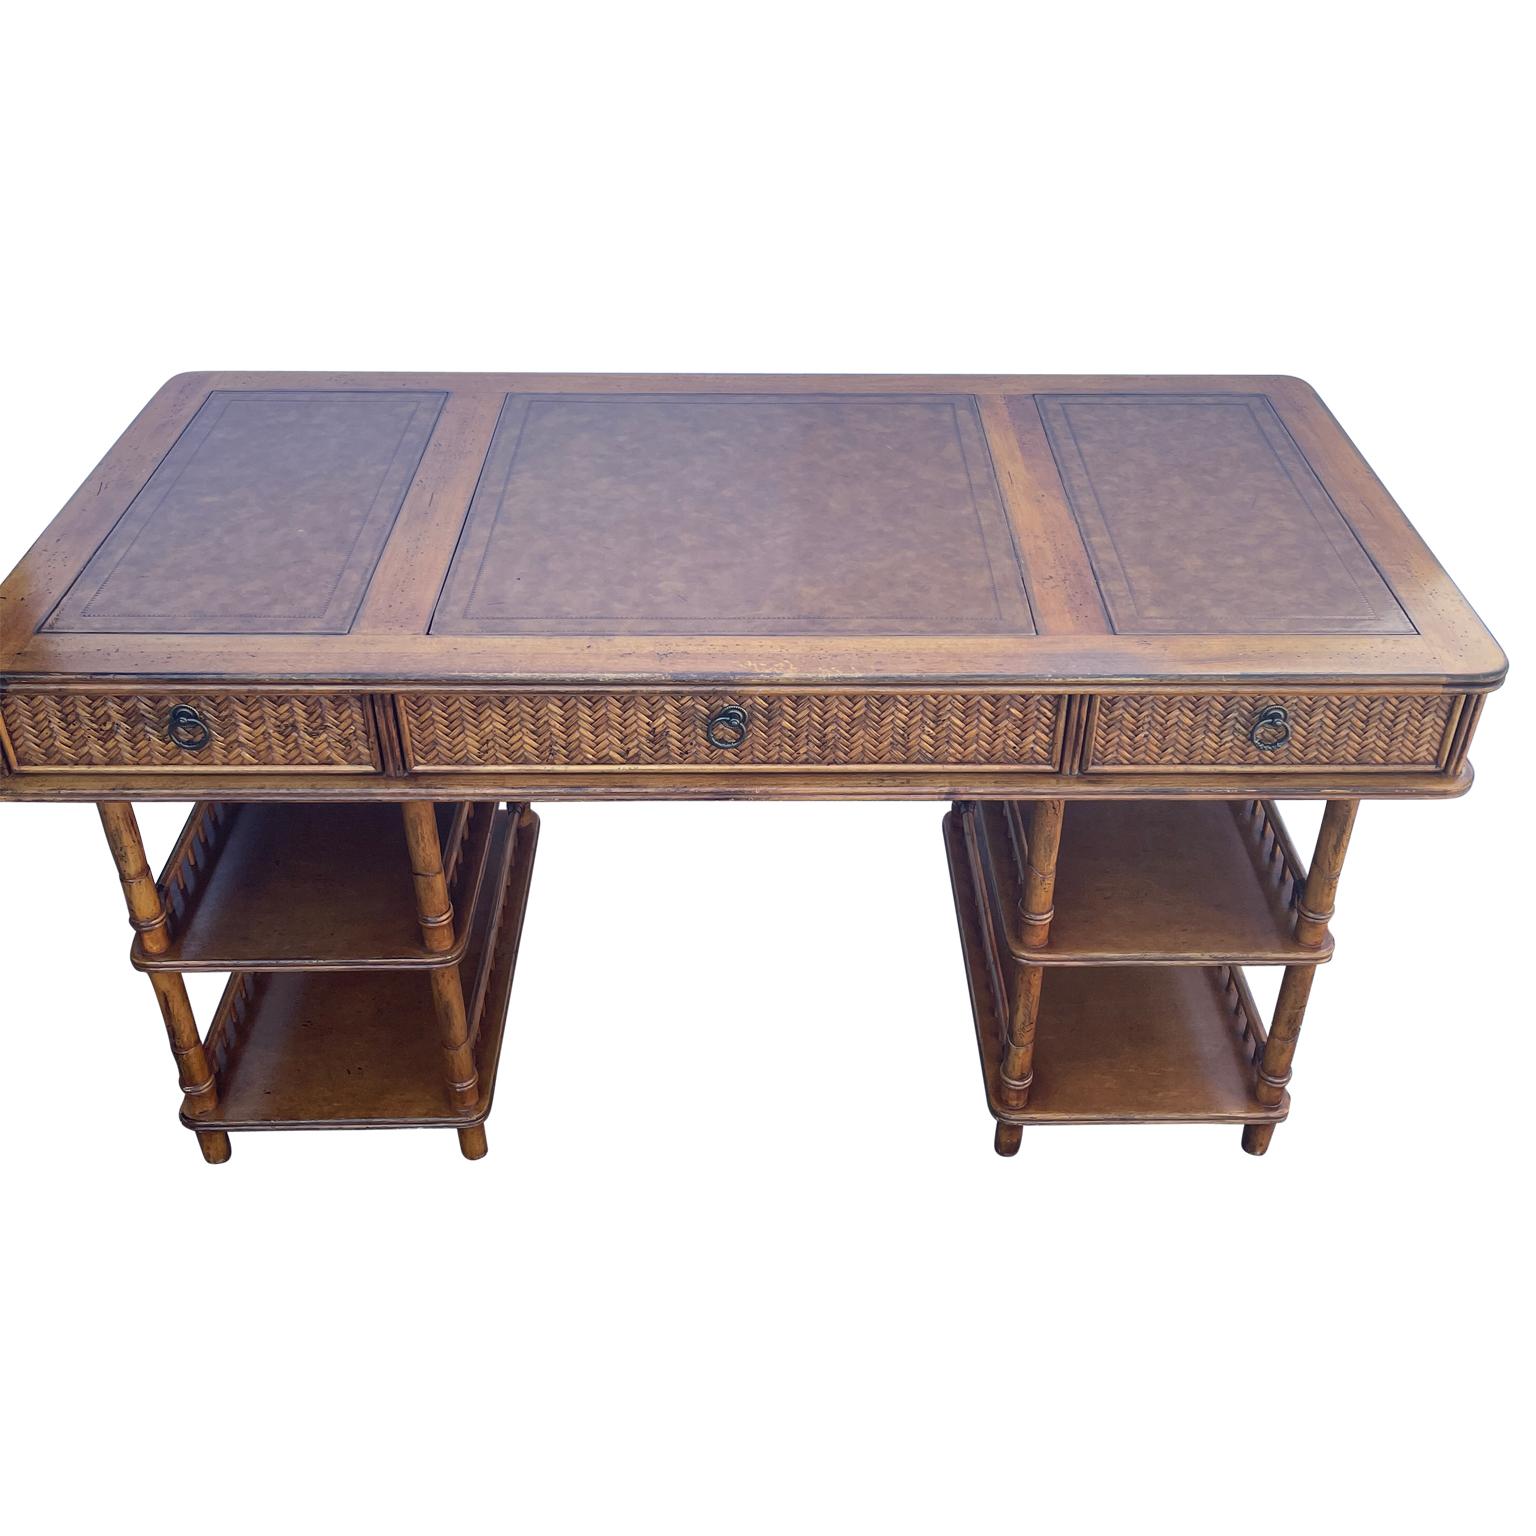 British Colonial Vintage Colonial Style Faux Bamboo Writing Desk With Glass Top